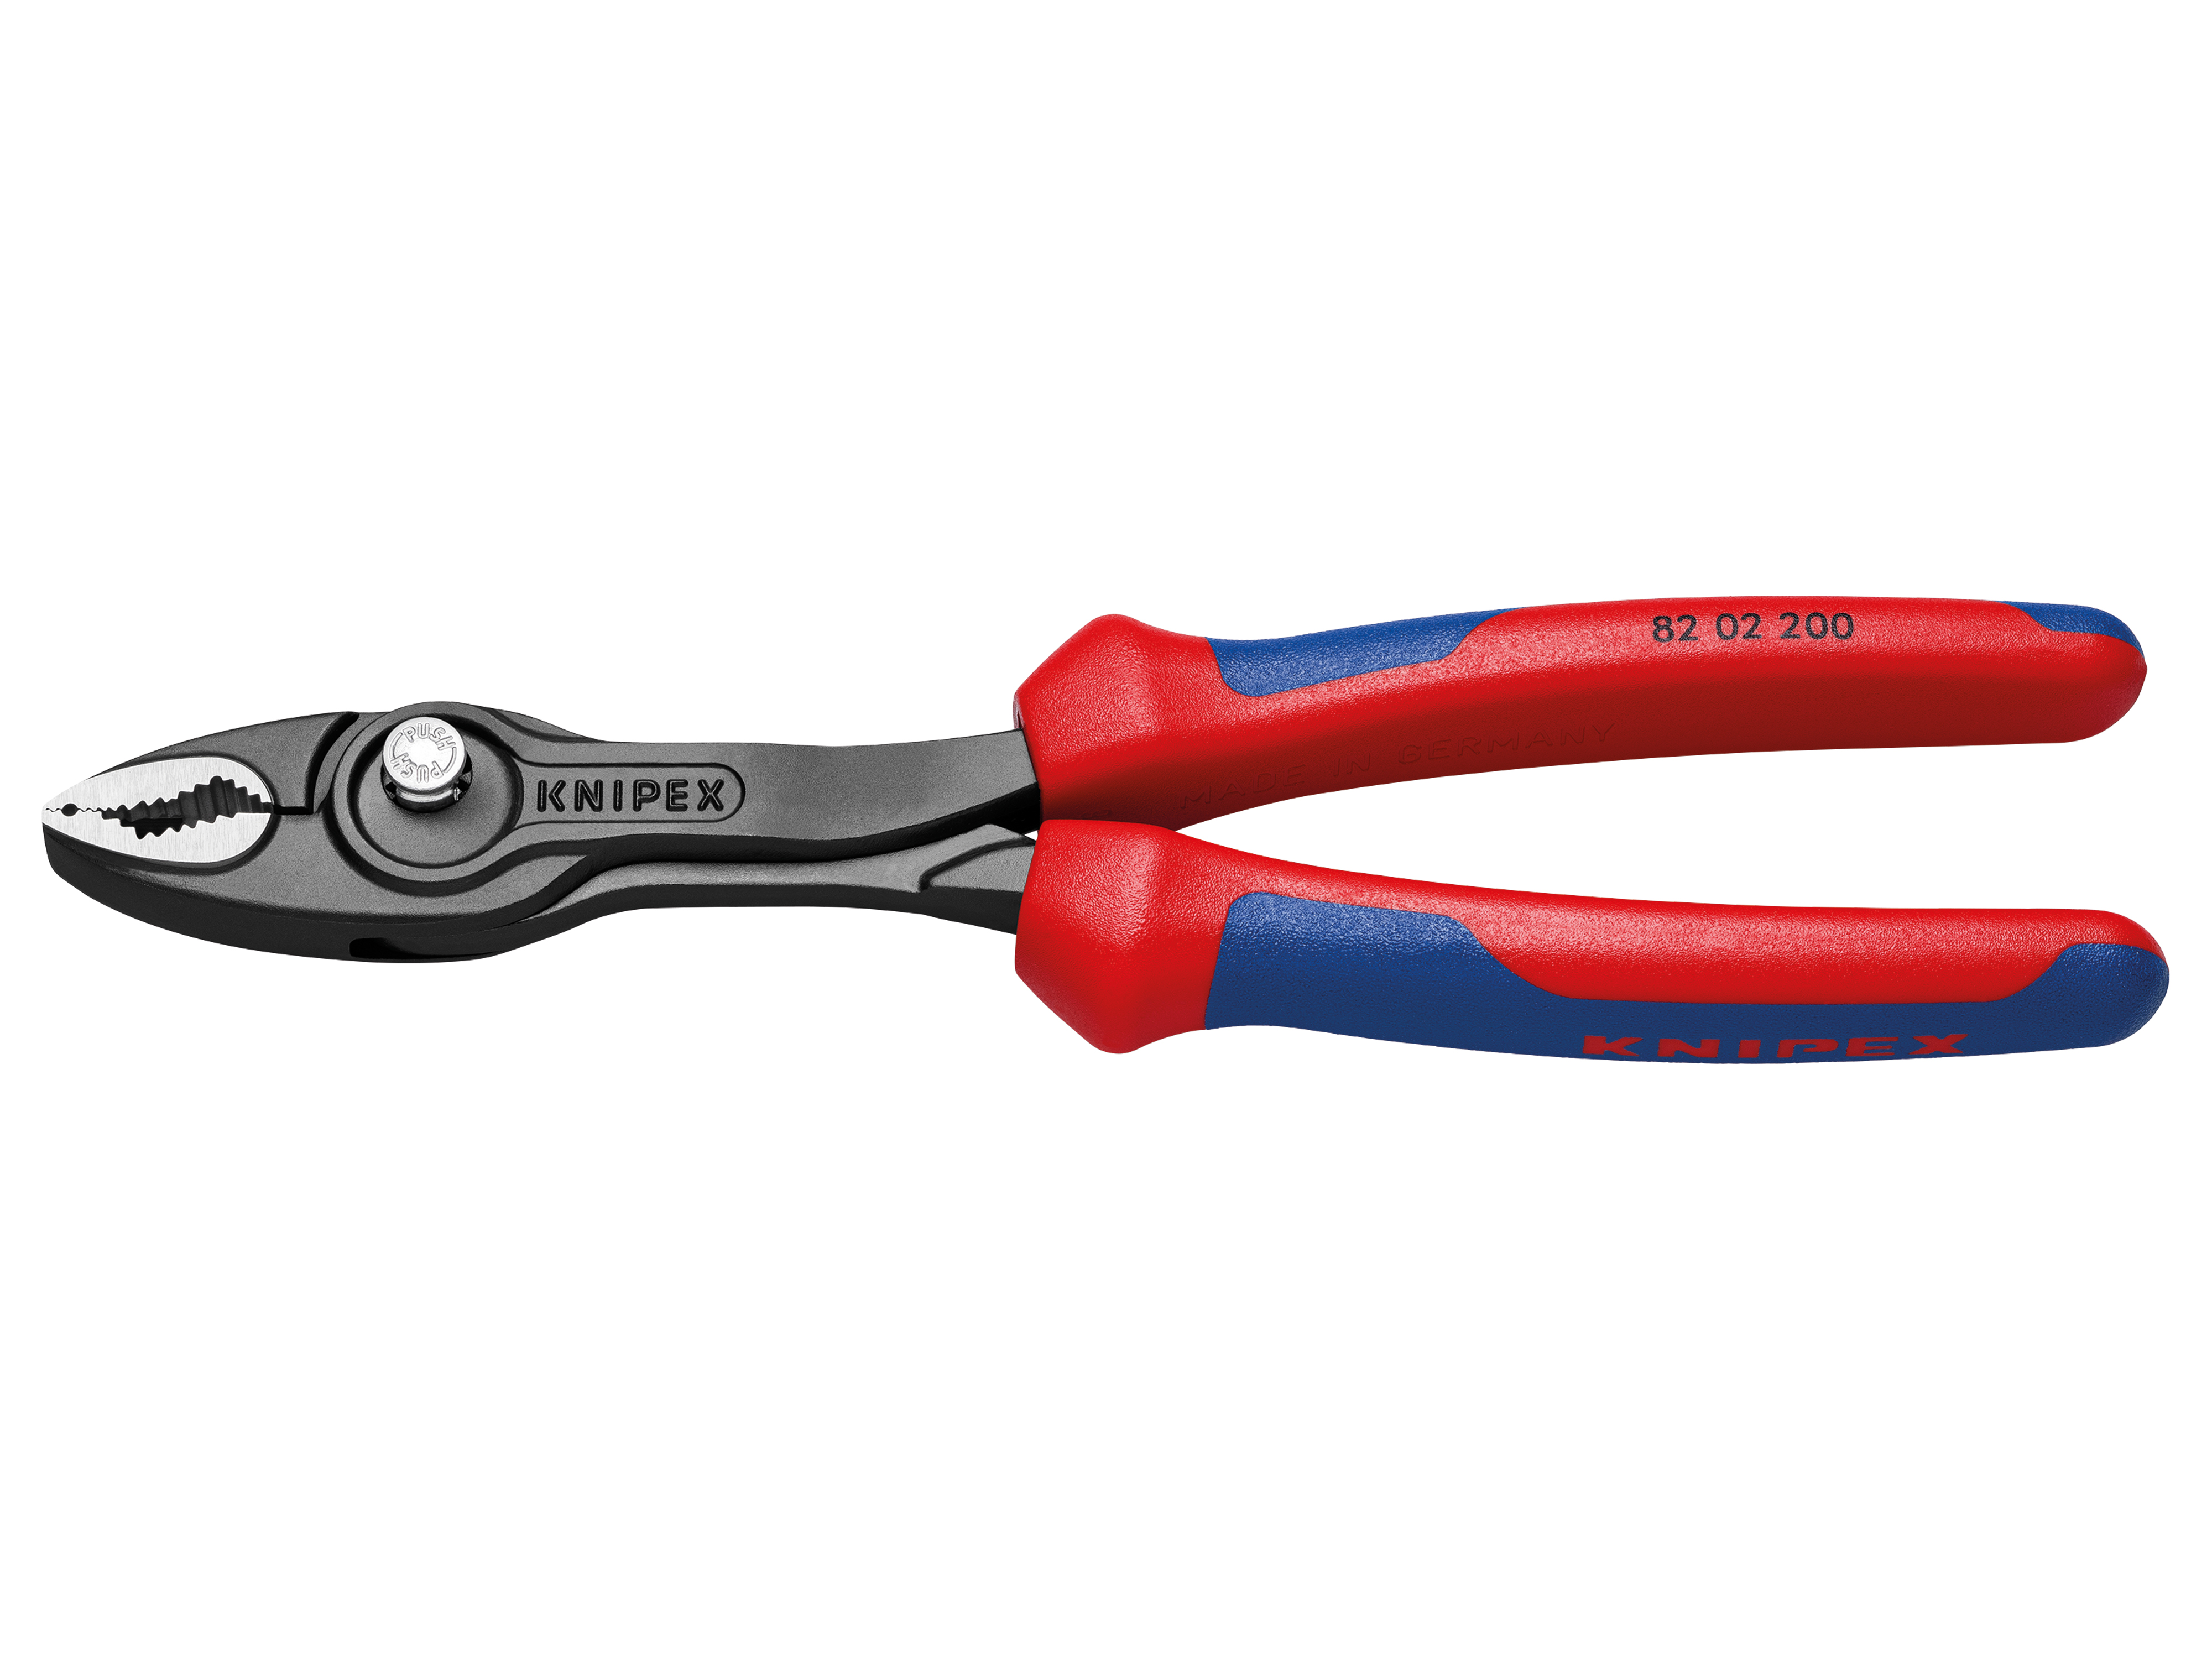 KNIPEX Frontgreifzange, TwinGrip, 200 mm, 82 02 200